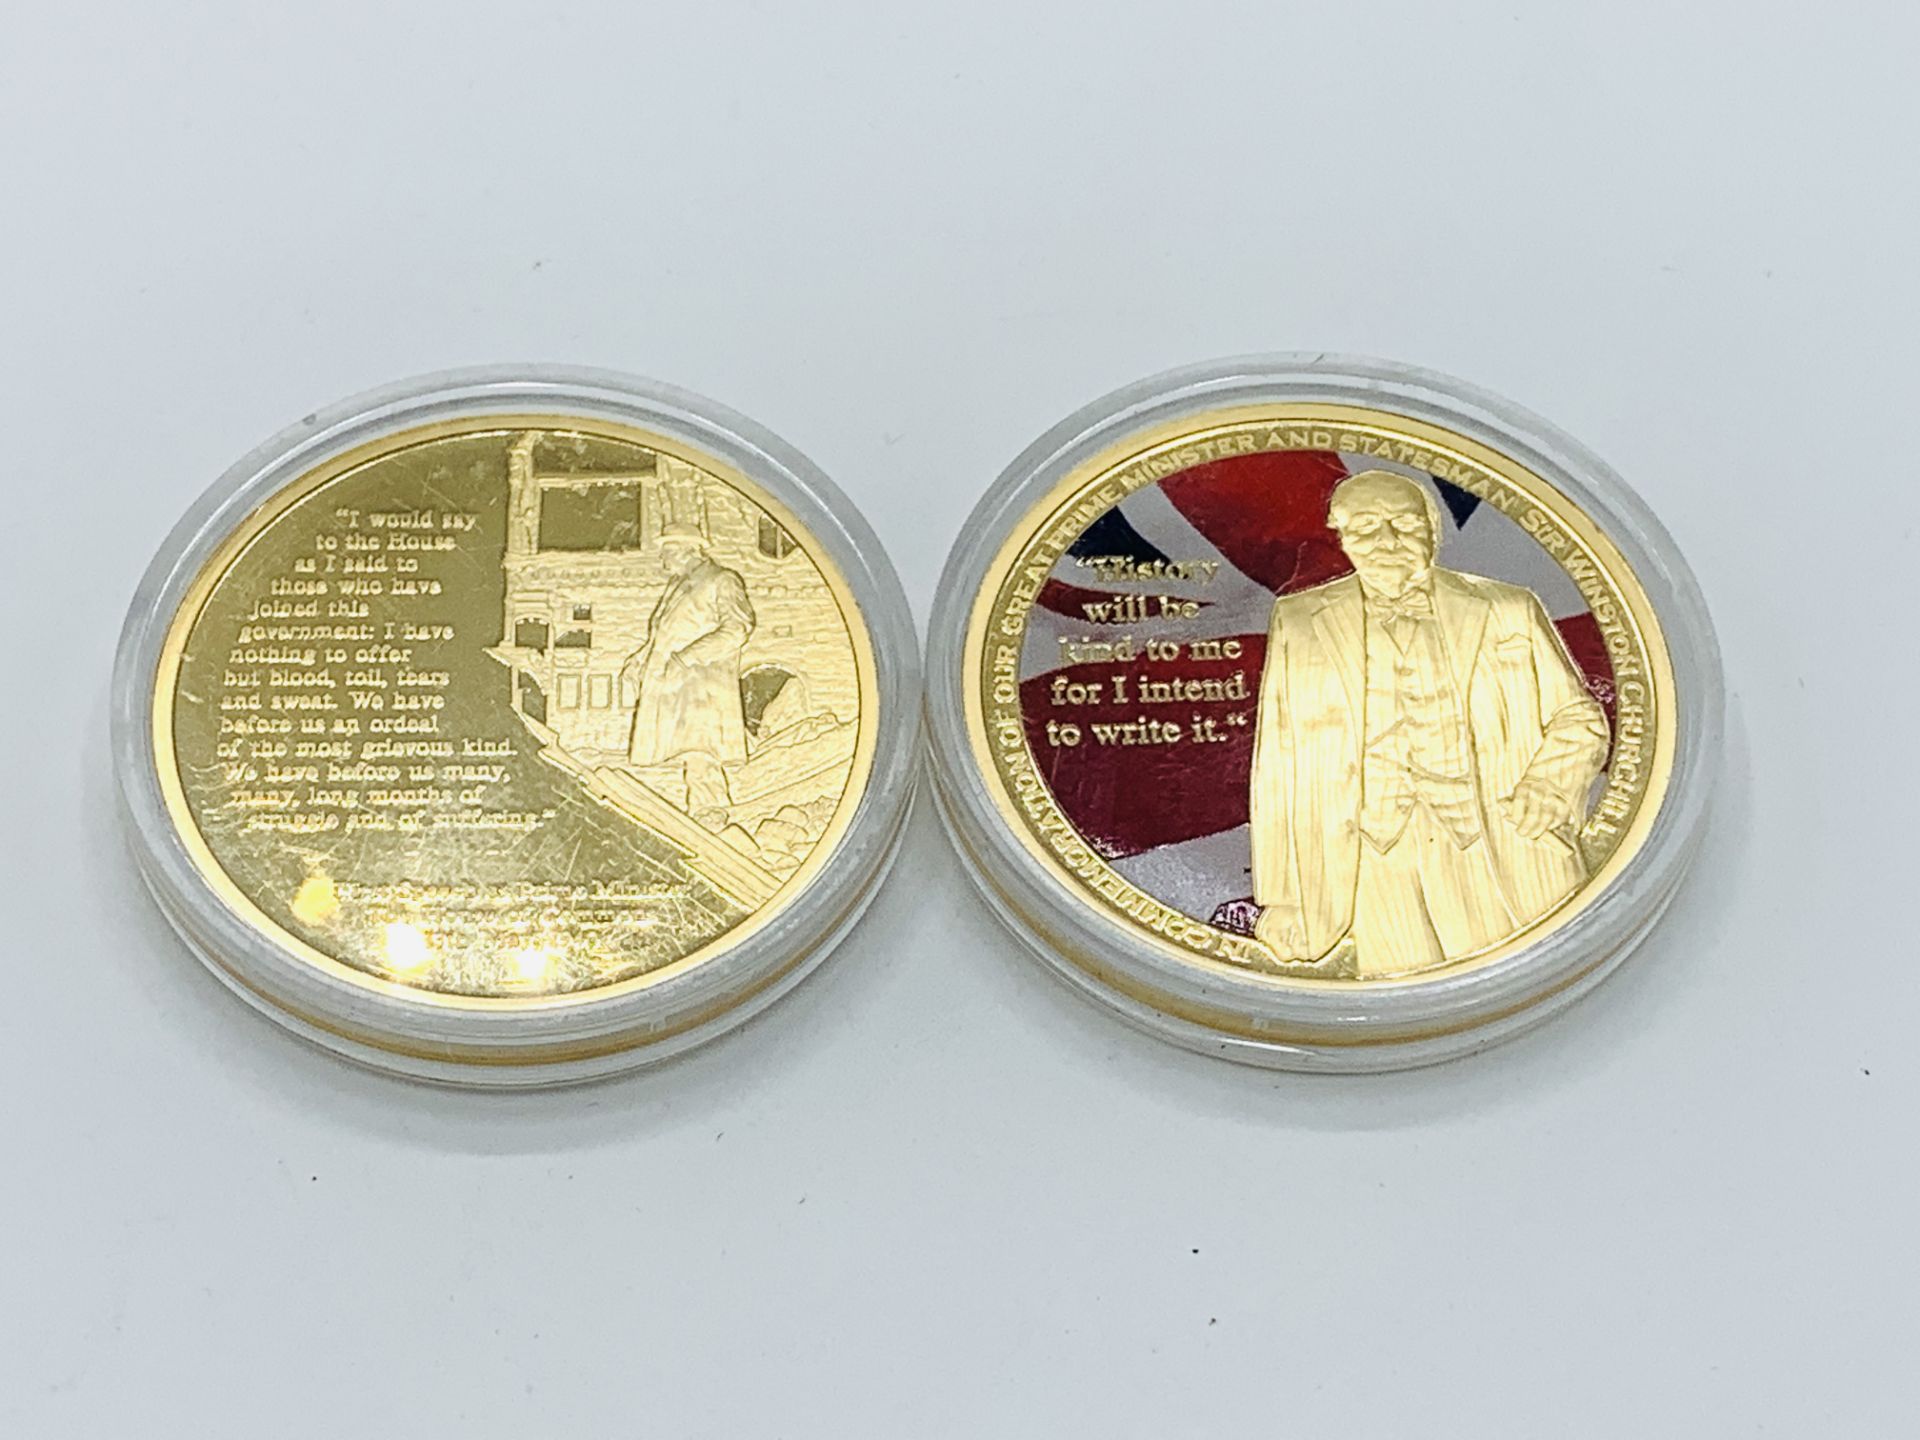 Two gold plated Sir Winston Churchill commemorative coins